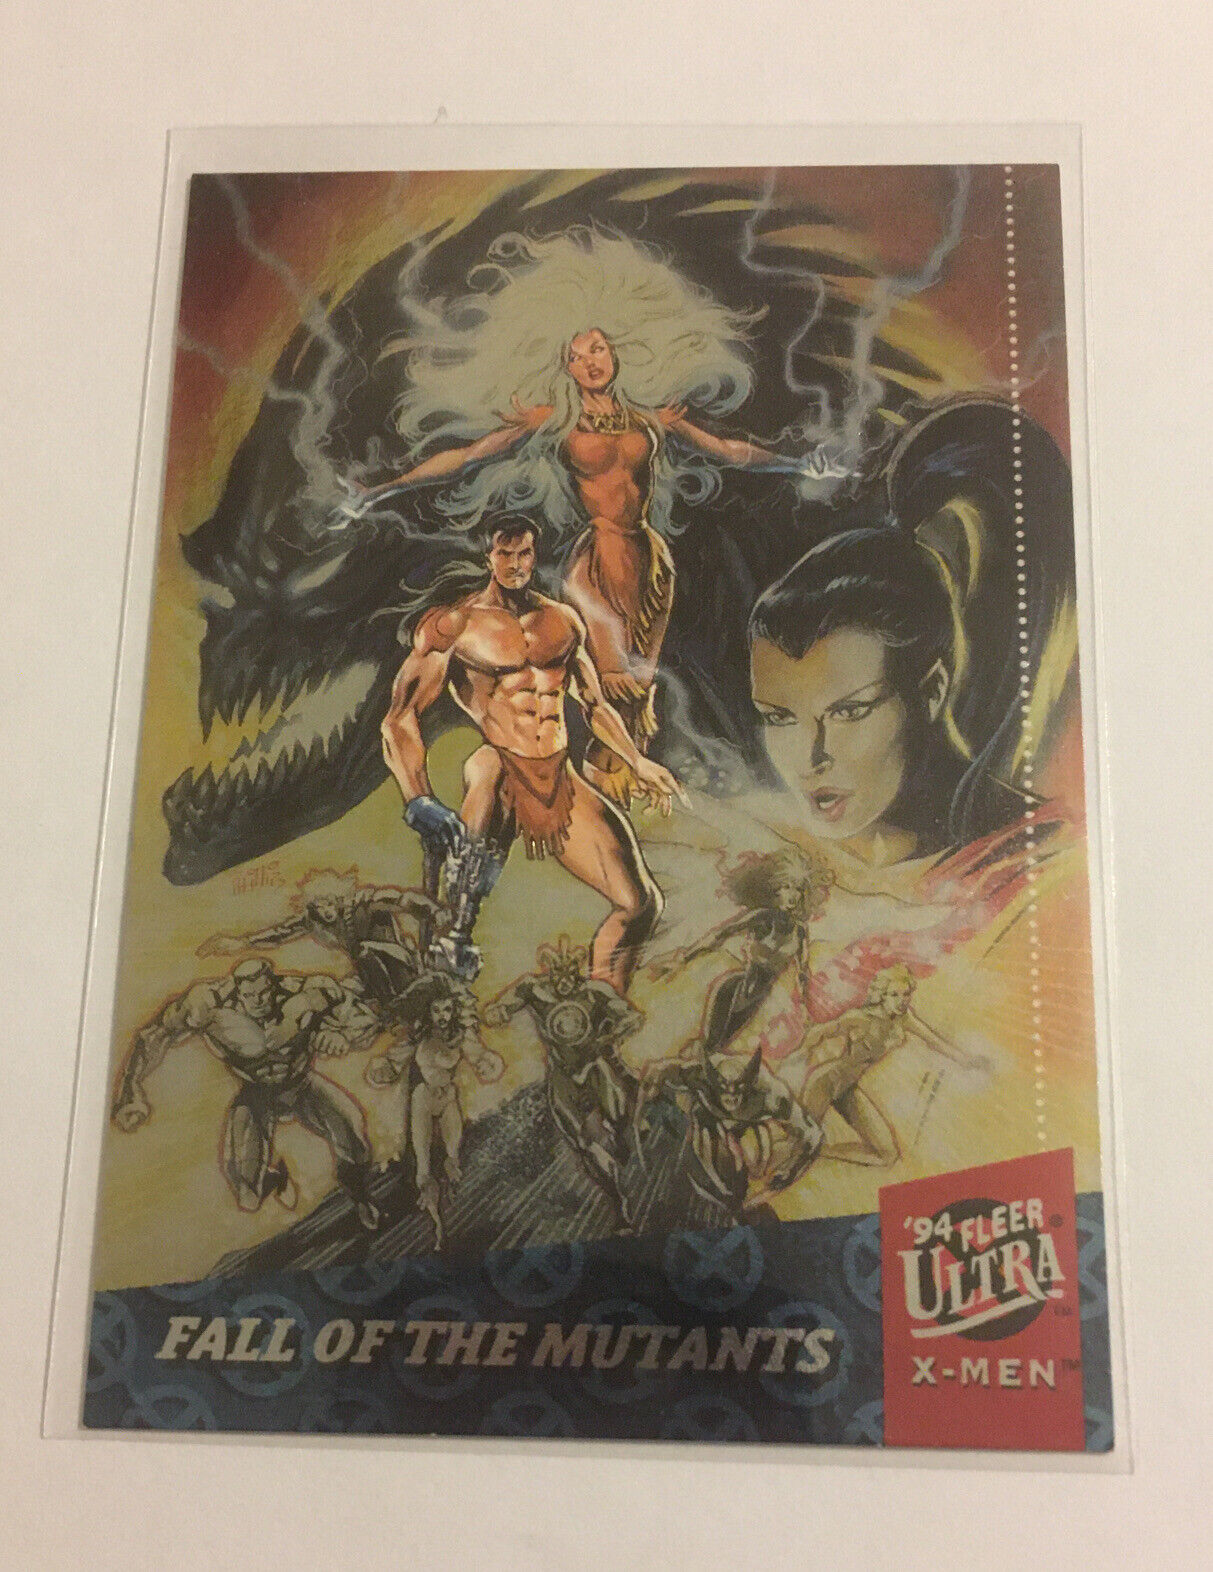 1994 Fleer Ultra Marvel X-Men, Fall of the Mutants Silver X-Overs Card #2